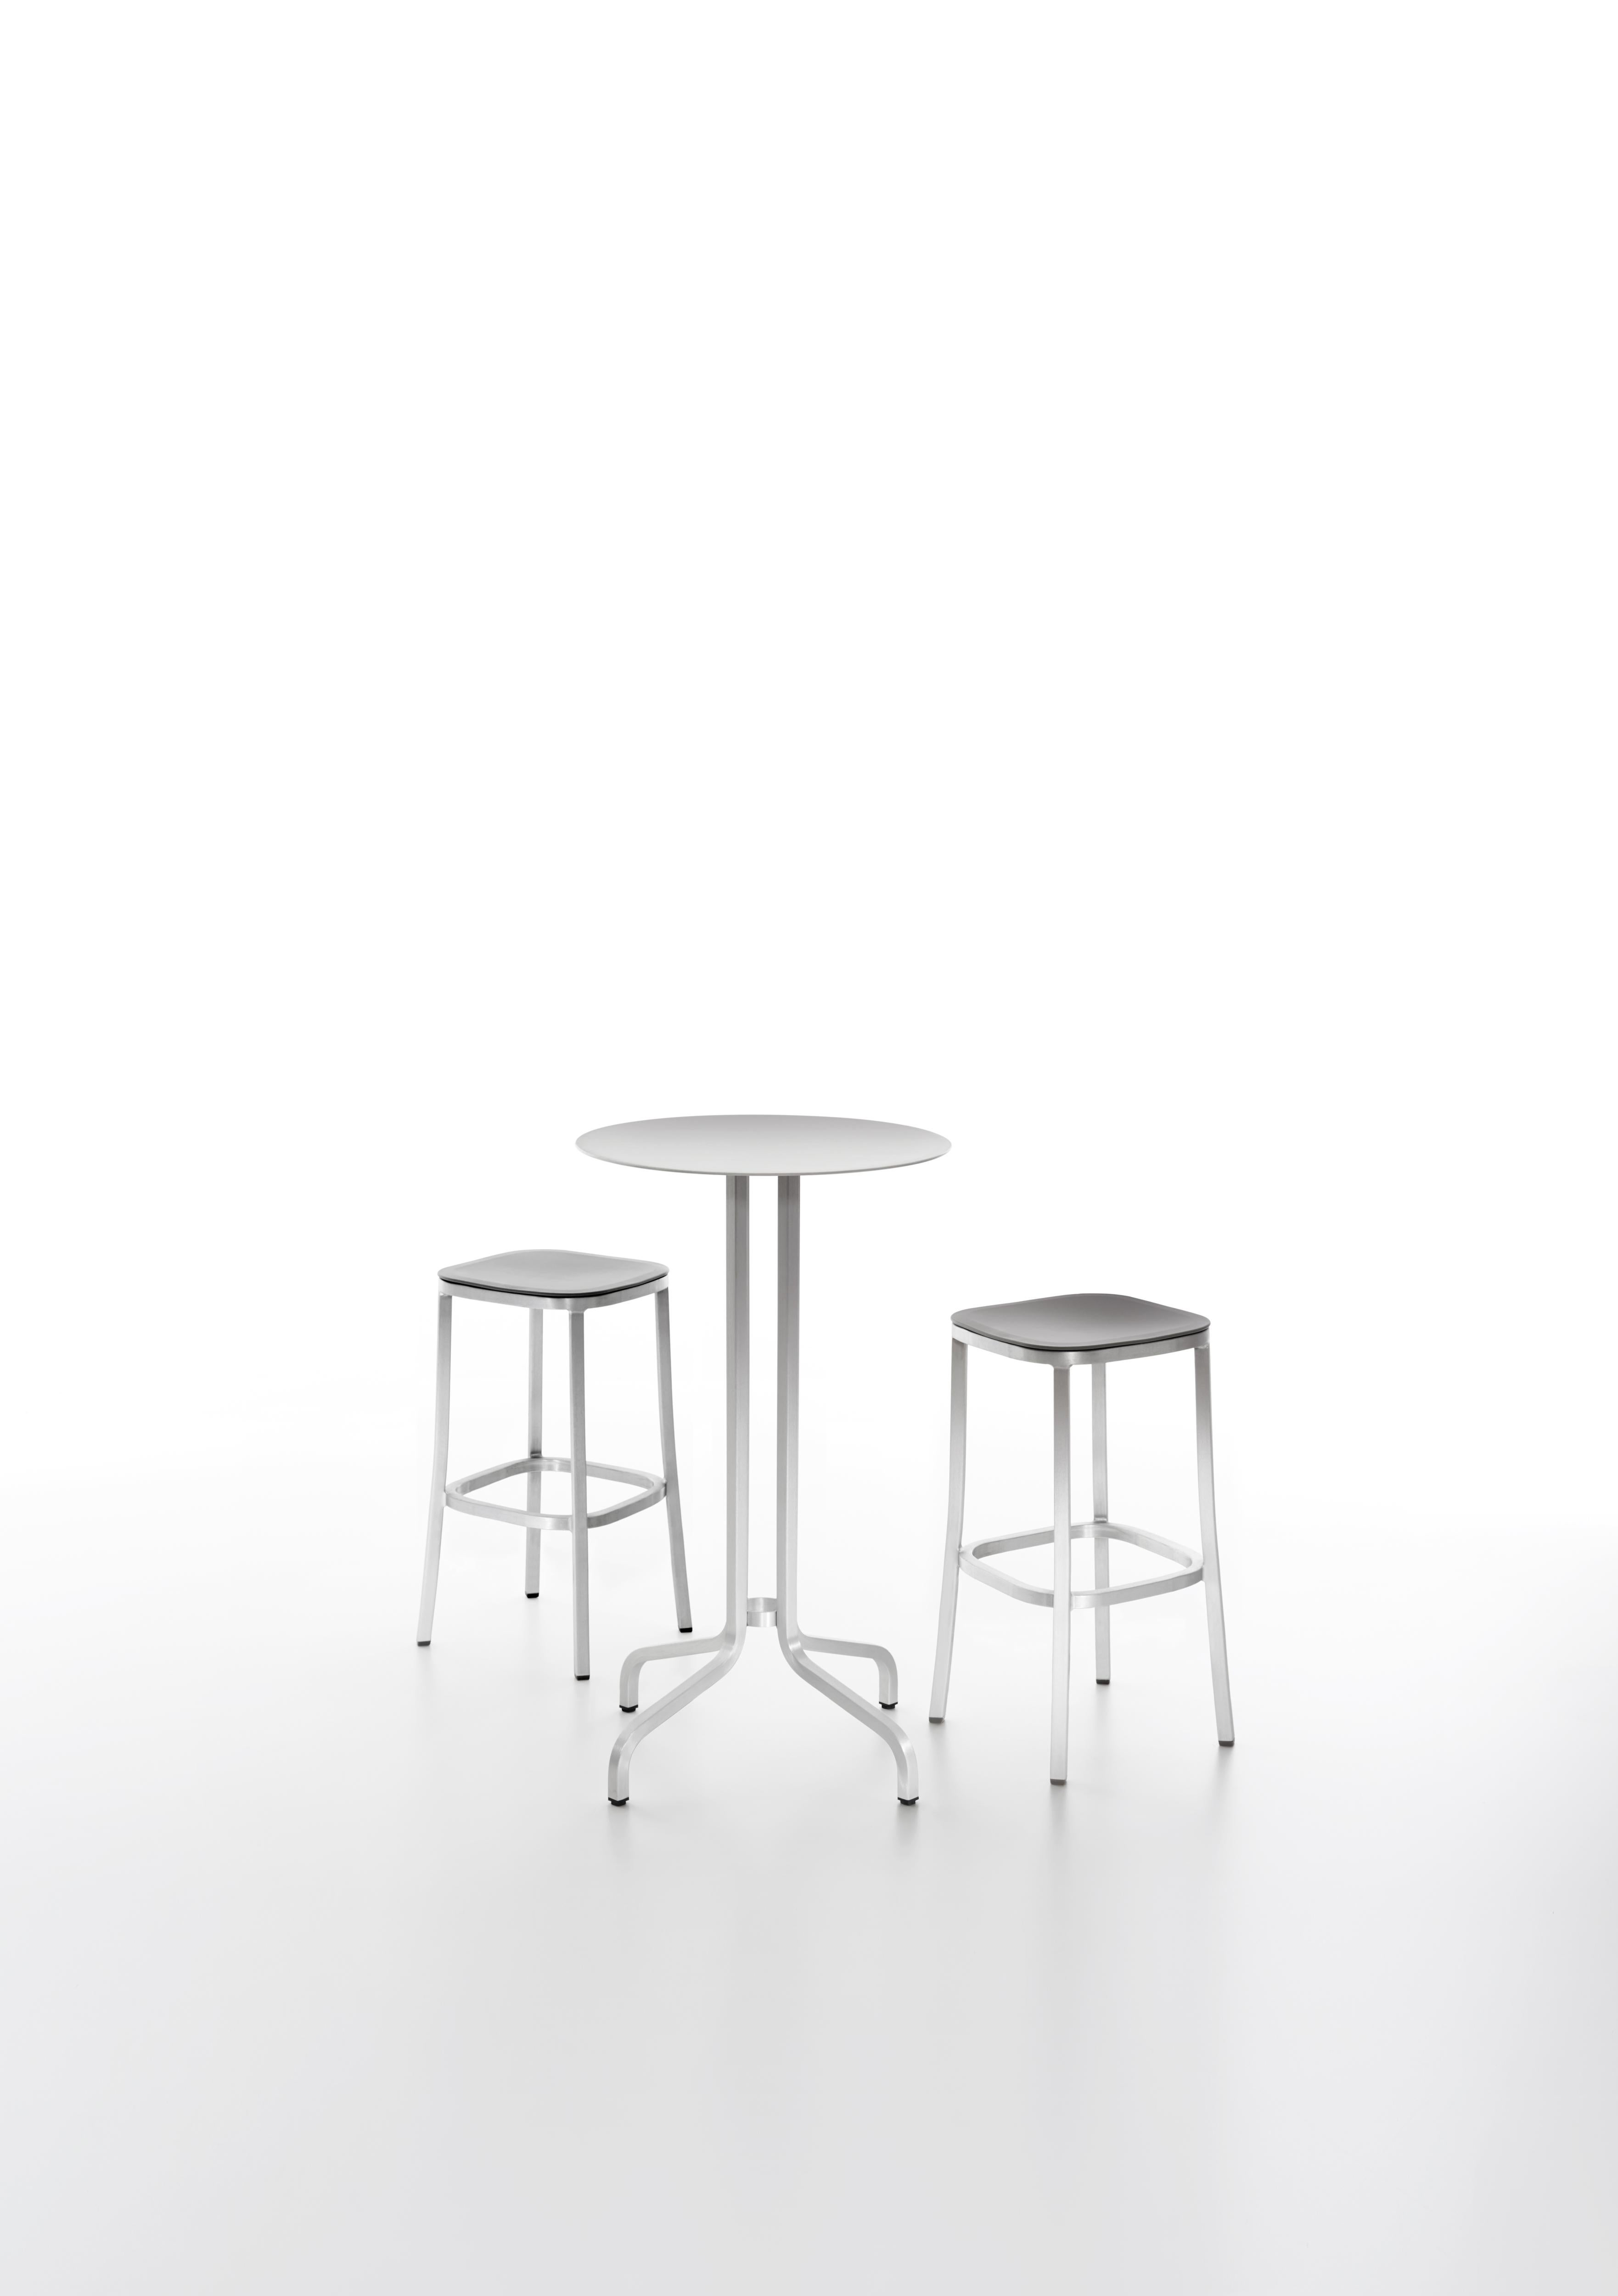 Emeco Small Stool in Brushed Aluminum & Bordeaux by Jasper Morrison In New Condition For Sale In Hanover, PA